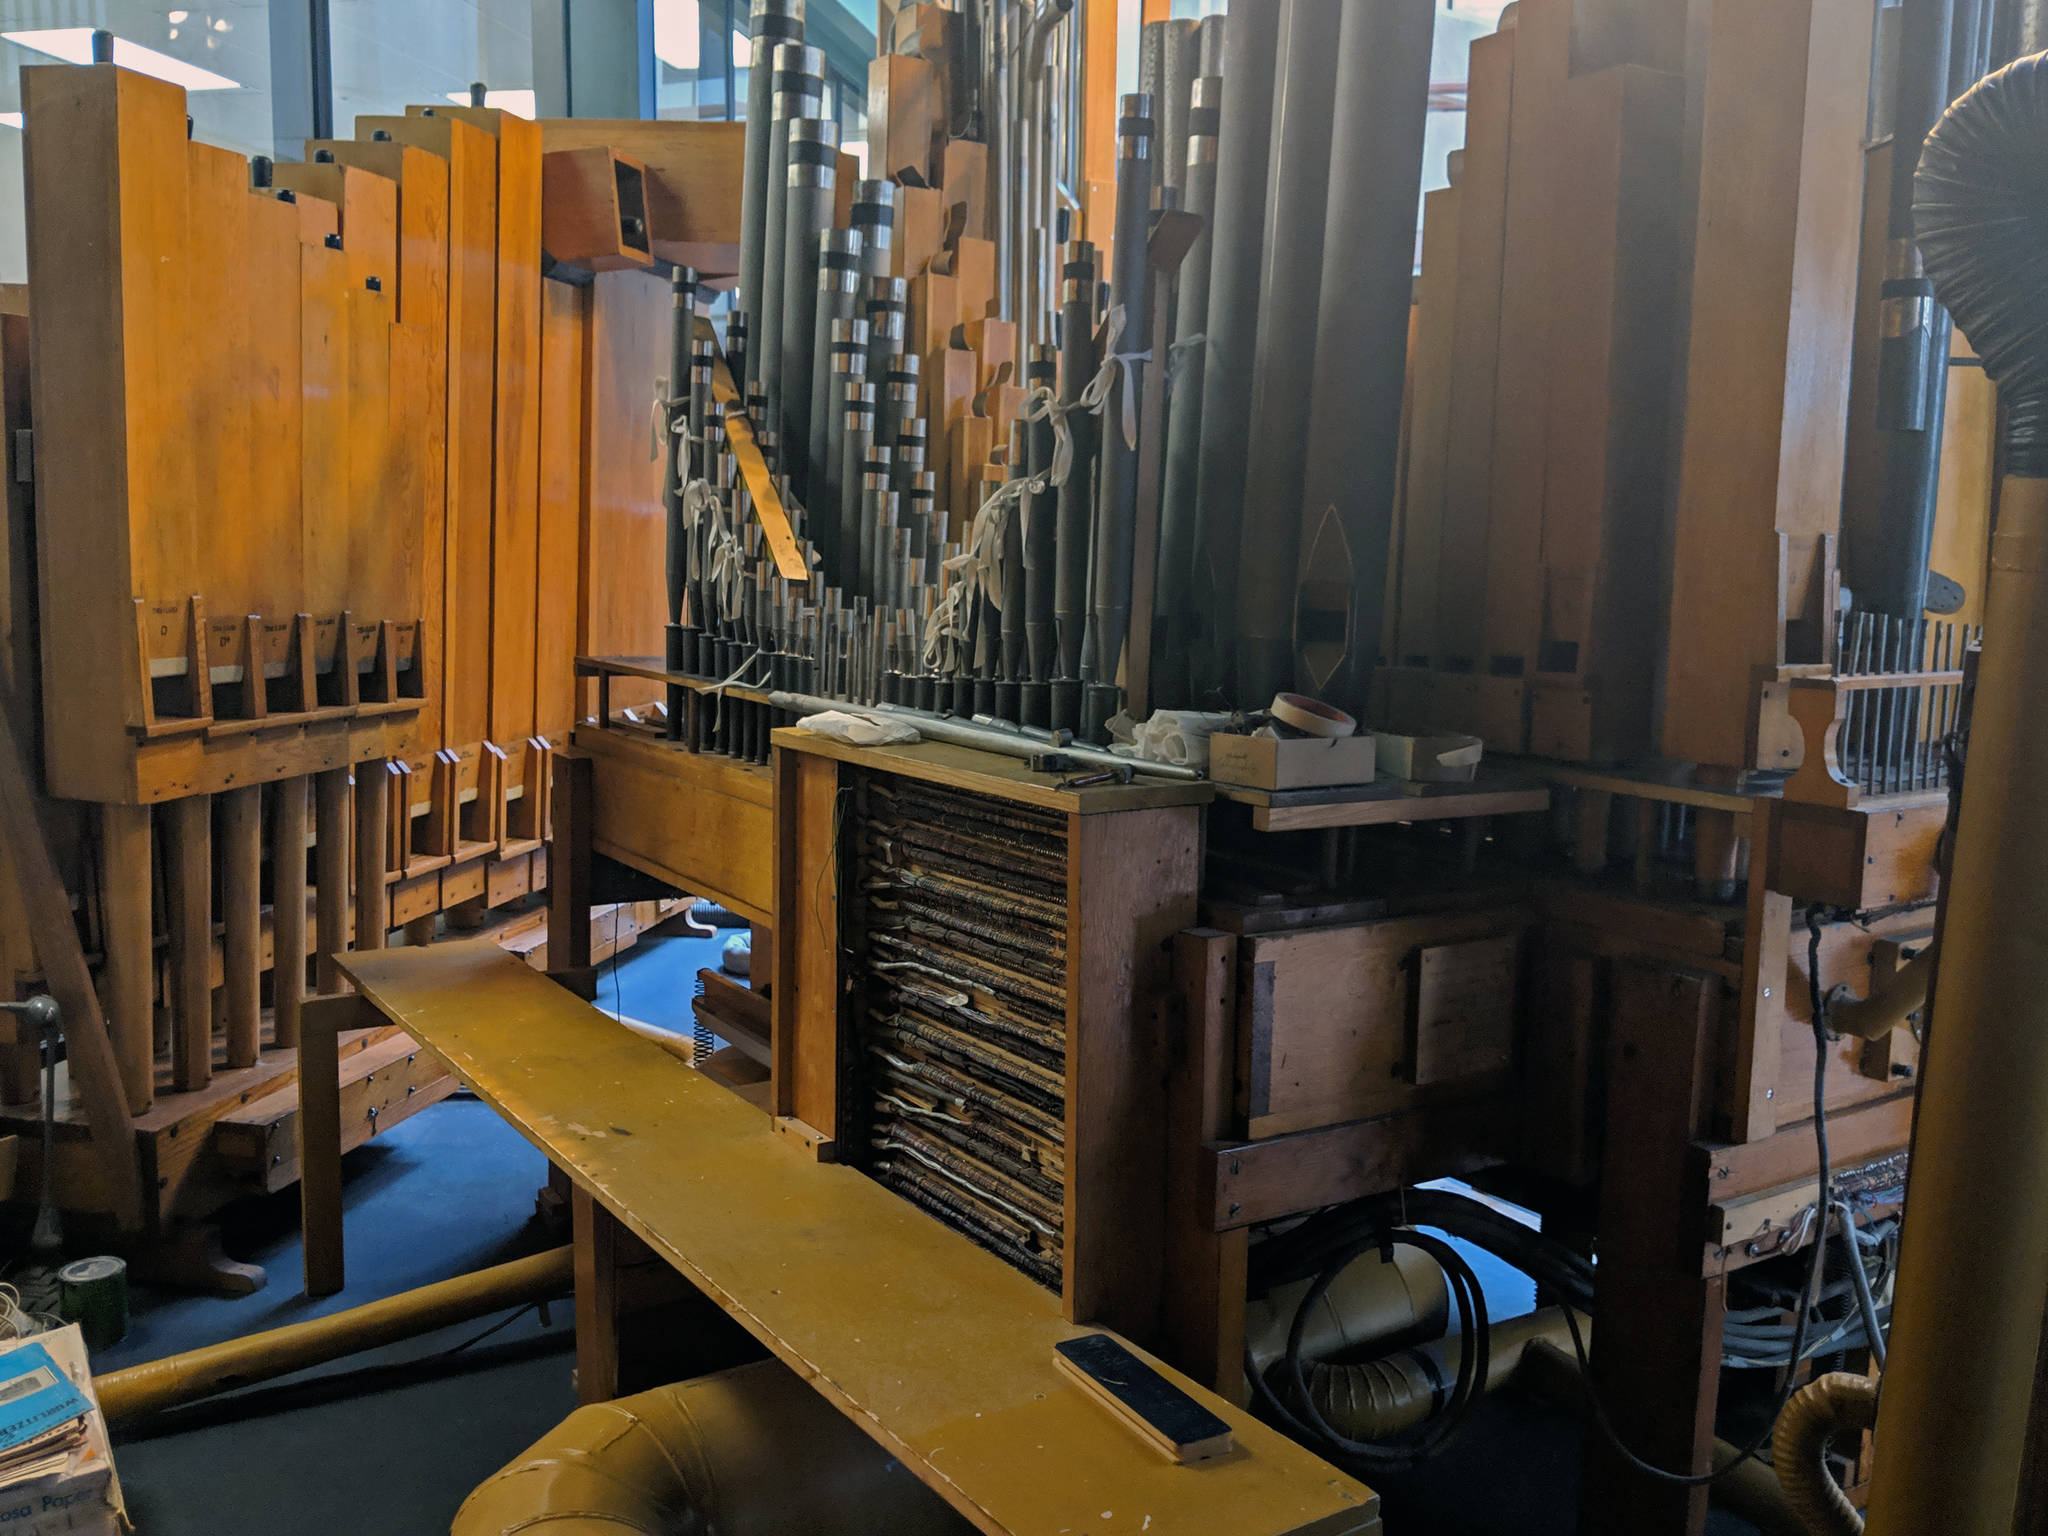 The view from inside the glass display that houses the Kimball pipe organ’s pipes show the engineering that went into the 20th century instrument. (Ben Hohenstatt | Capital City Weekly)